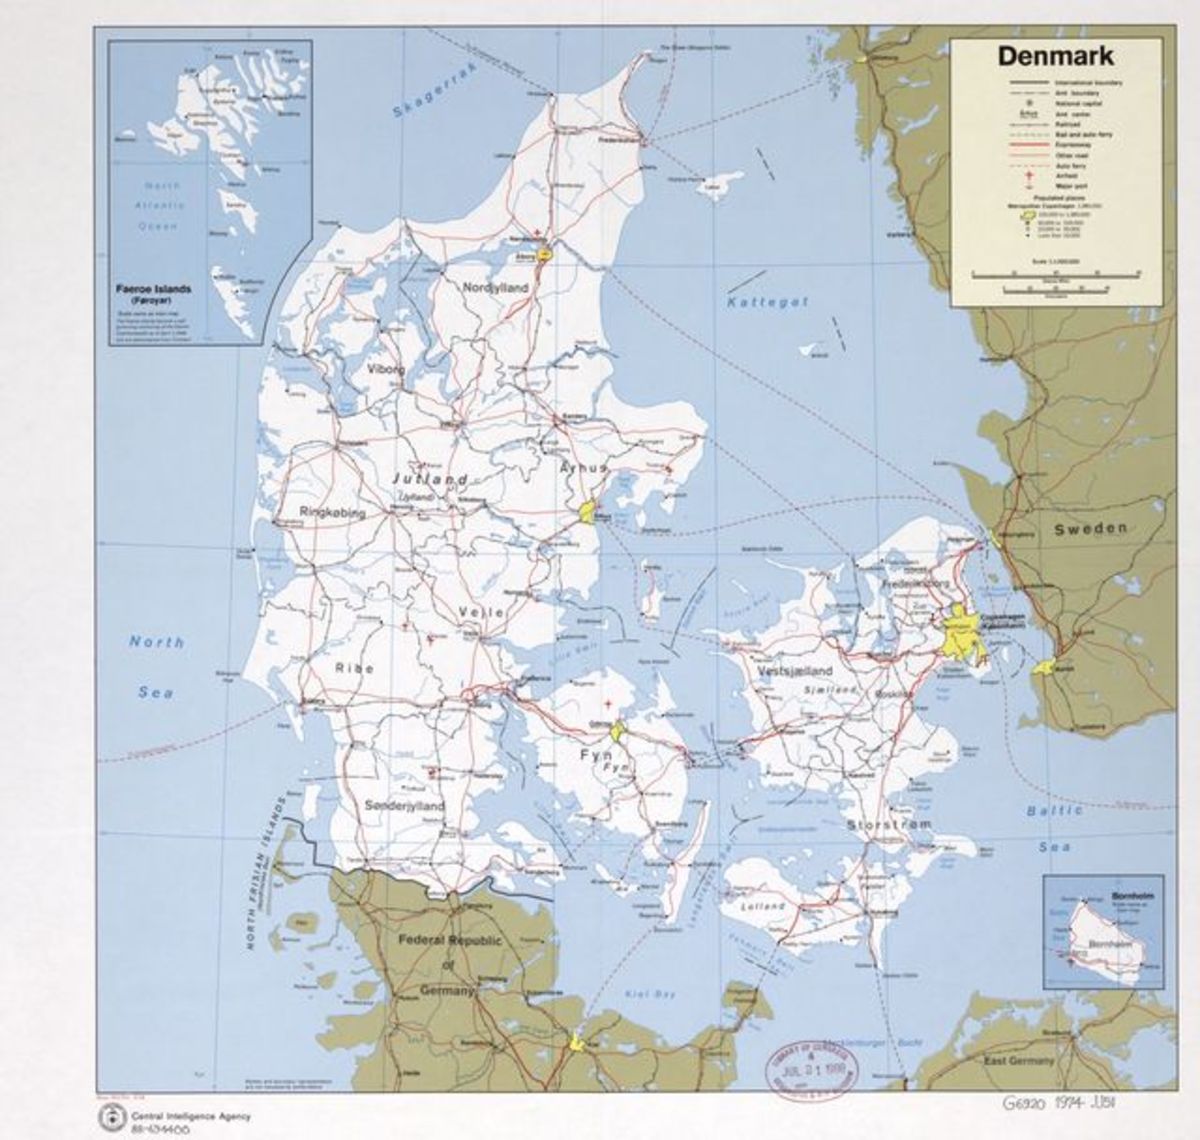 Read on to learn more about the physical features of Denmark.